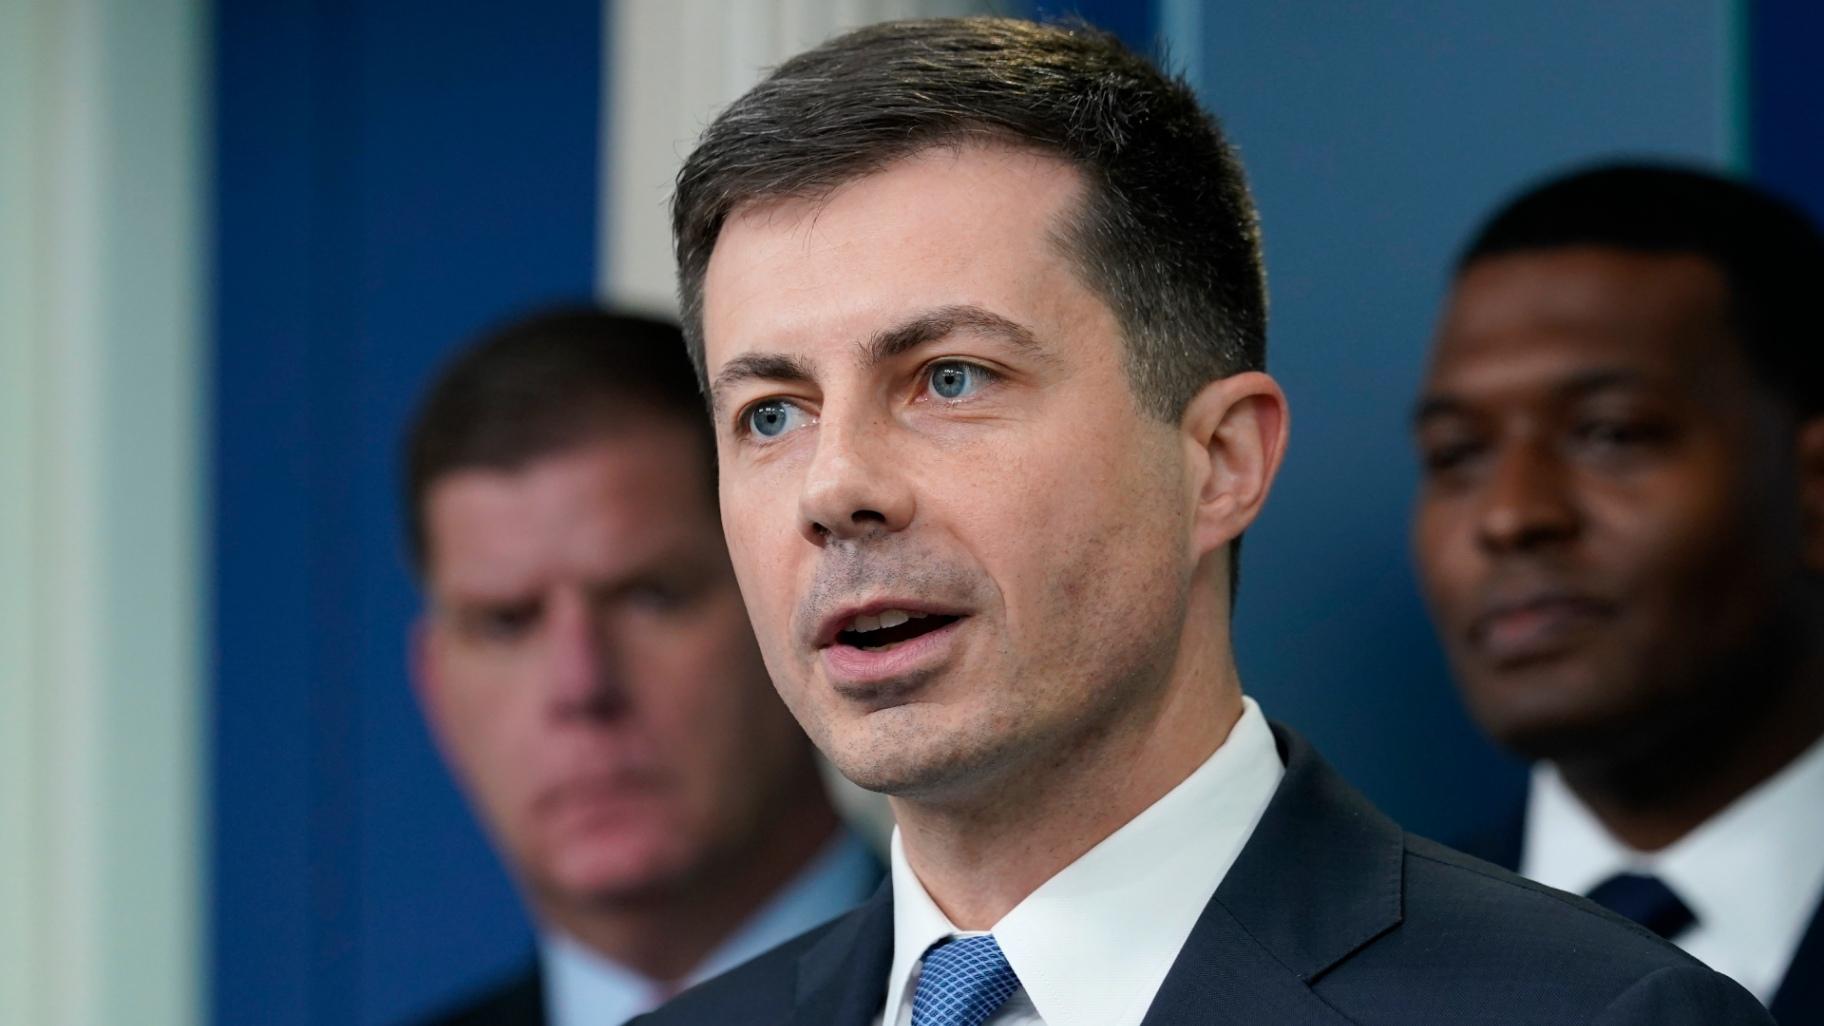 Transportation Secretary Pete Buttigieg, center, speaks during a briefing at the White House in Washington, May 16, 2022. (AP Photo / Susan Walsh, File)